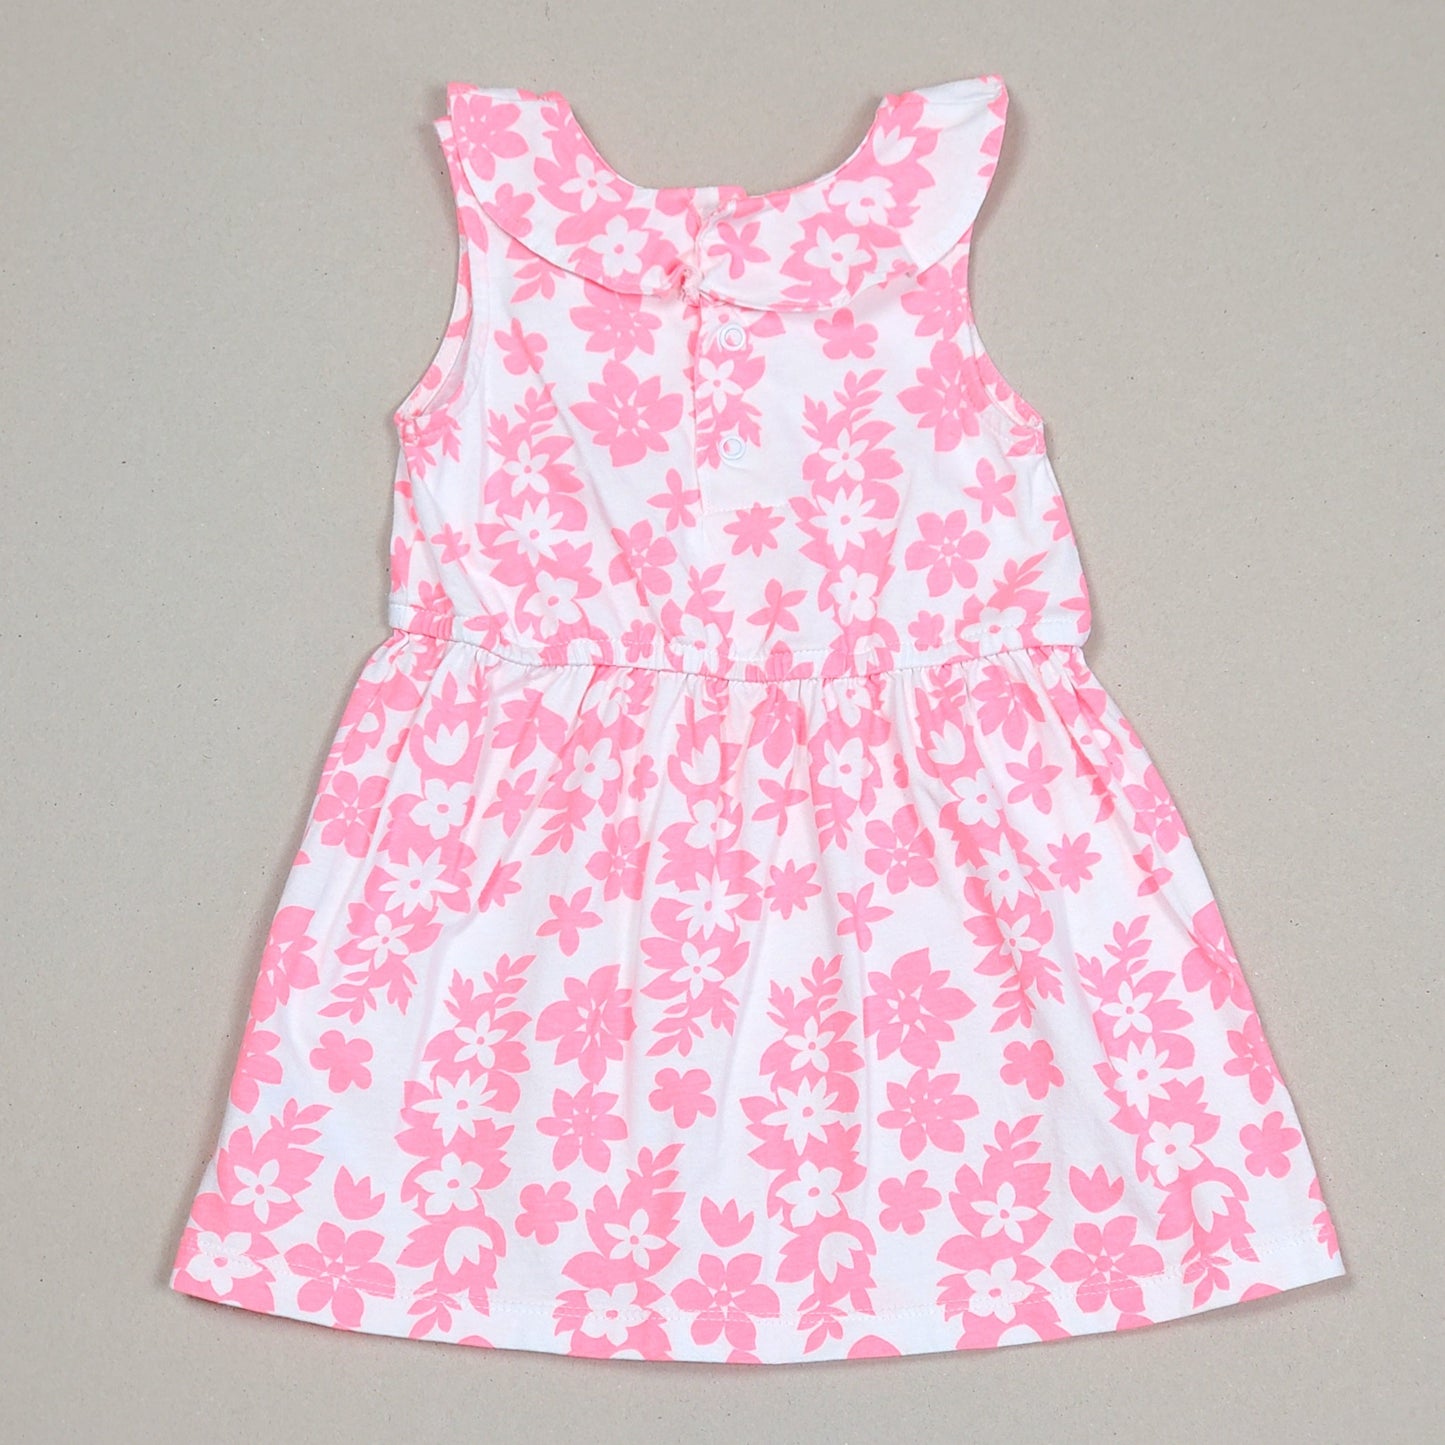 Carters Girls Pink White Floral Dress 18M Used View 2